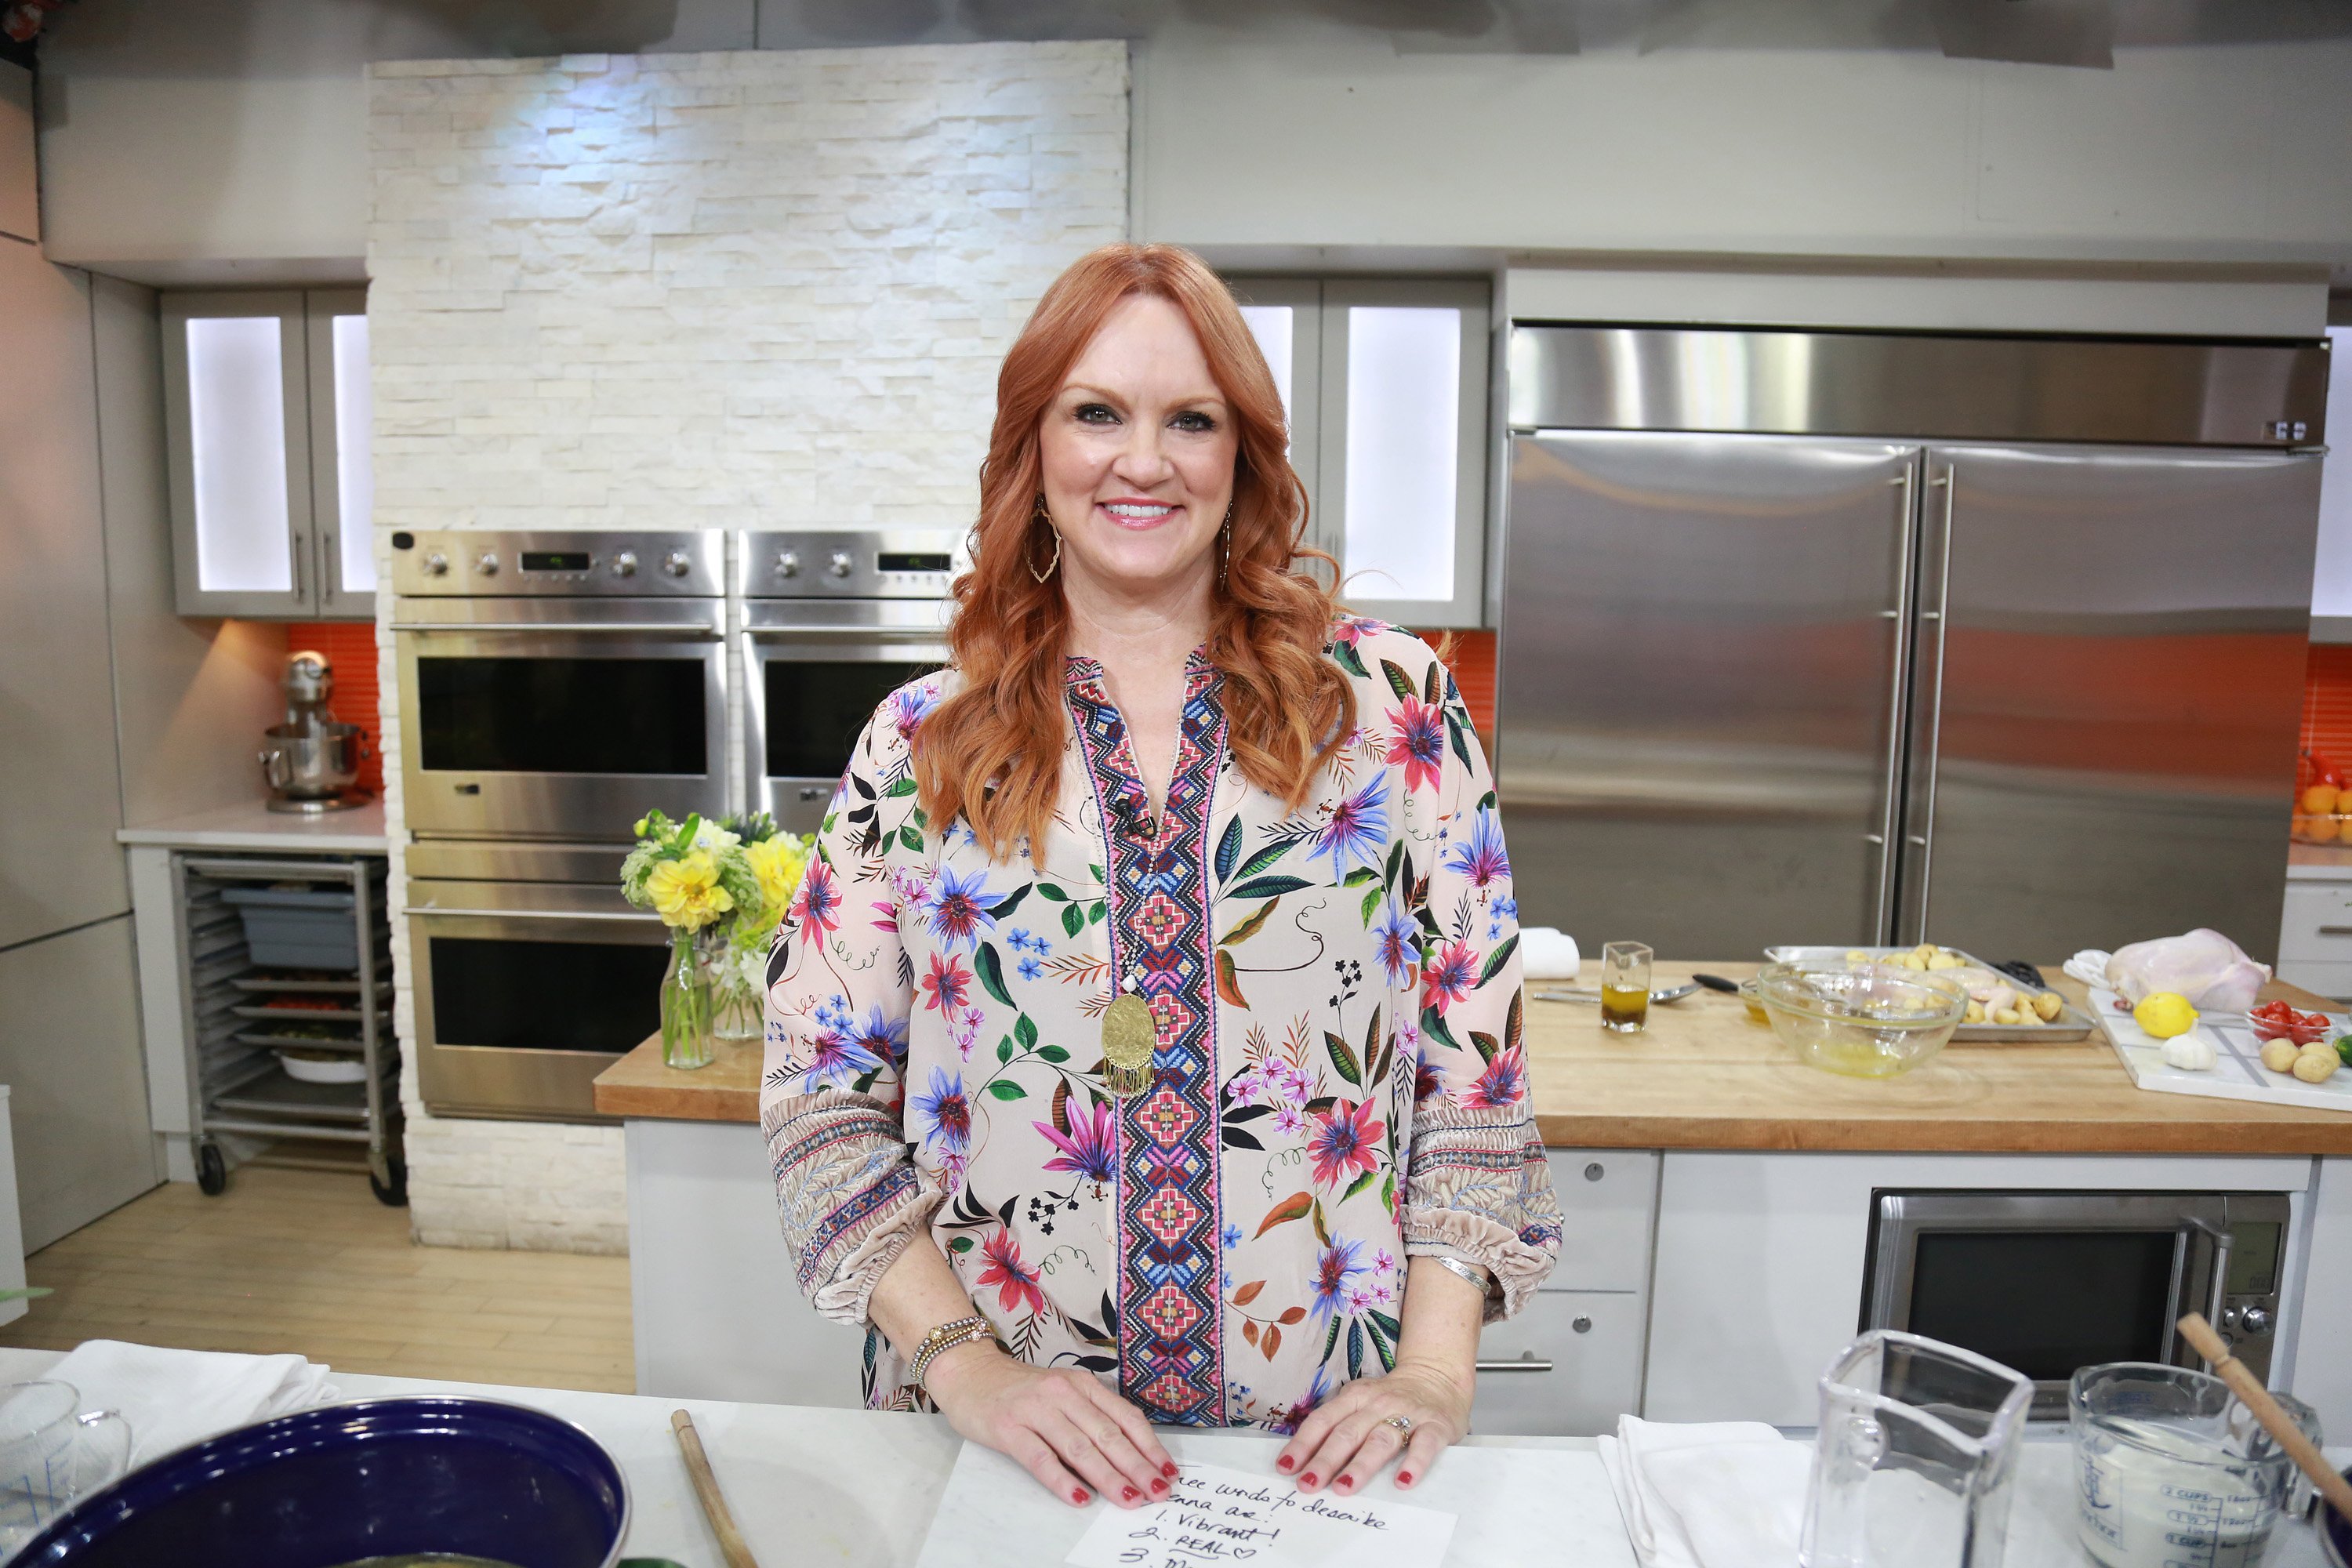 Ree Drummond | Tyler Essary/NBC/NBCU Photo Bank via Getty Images